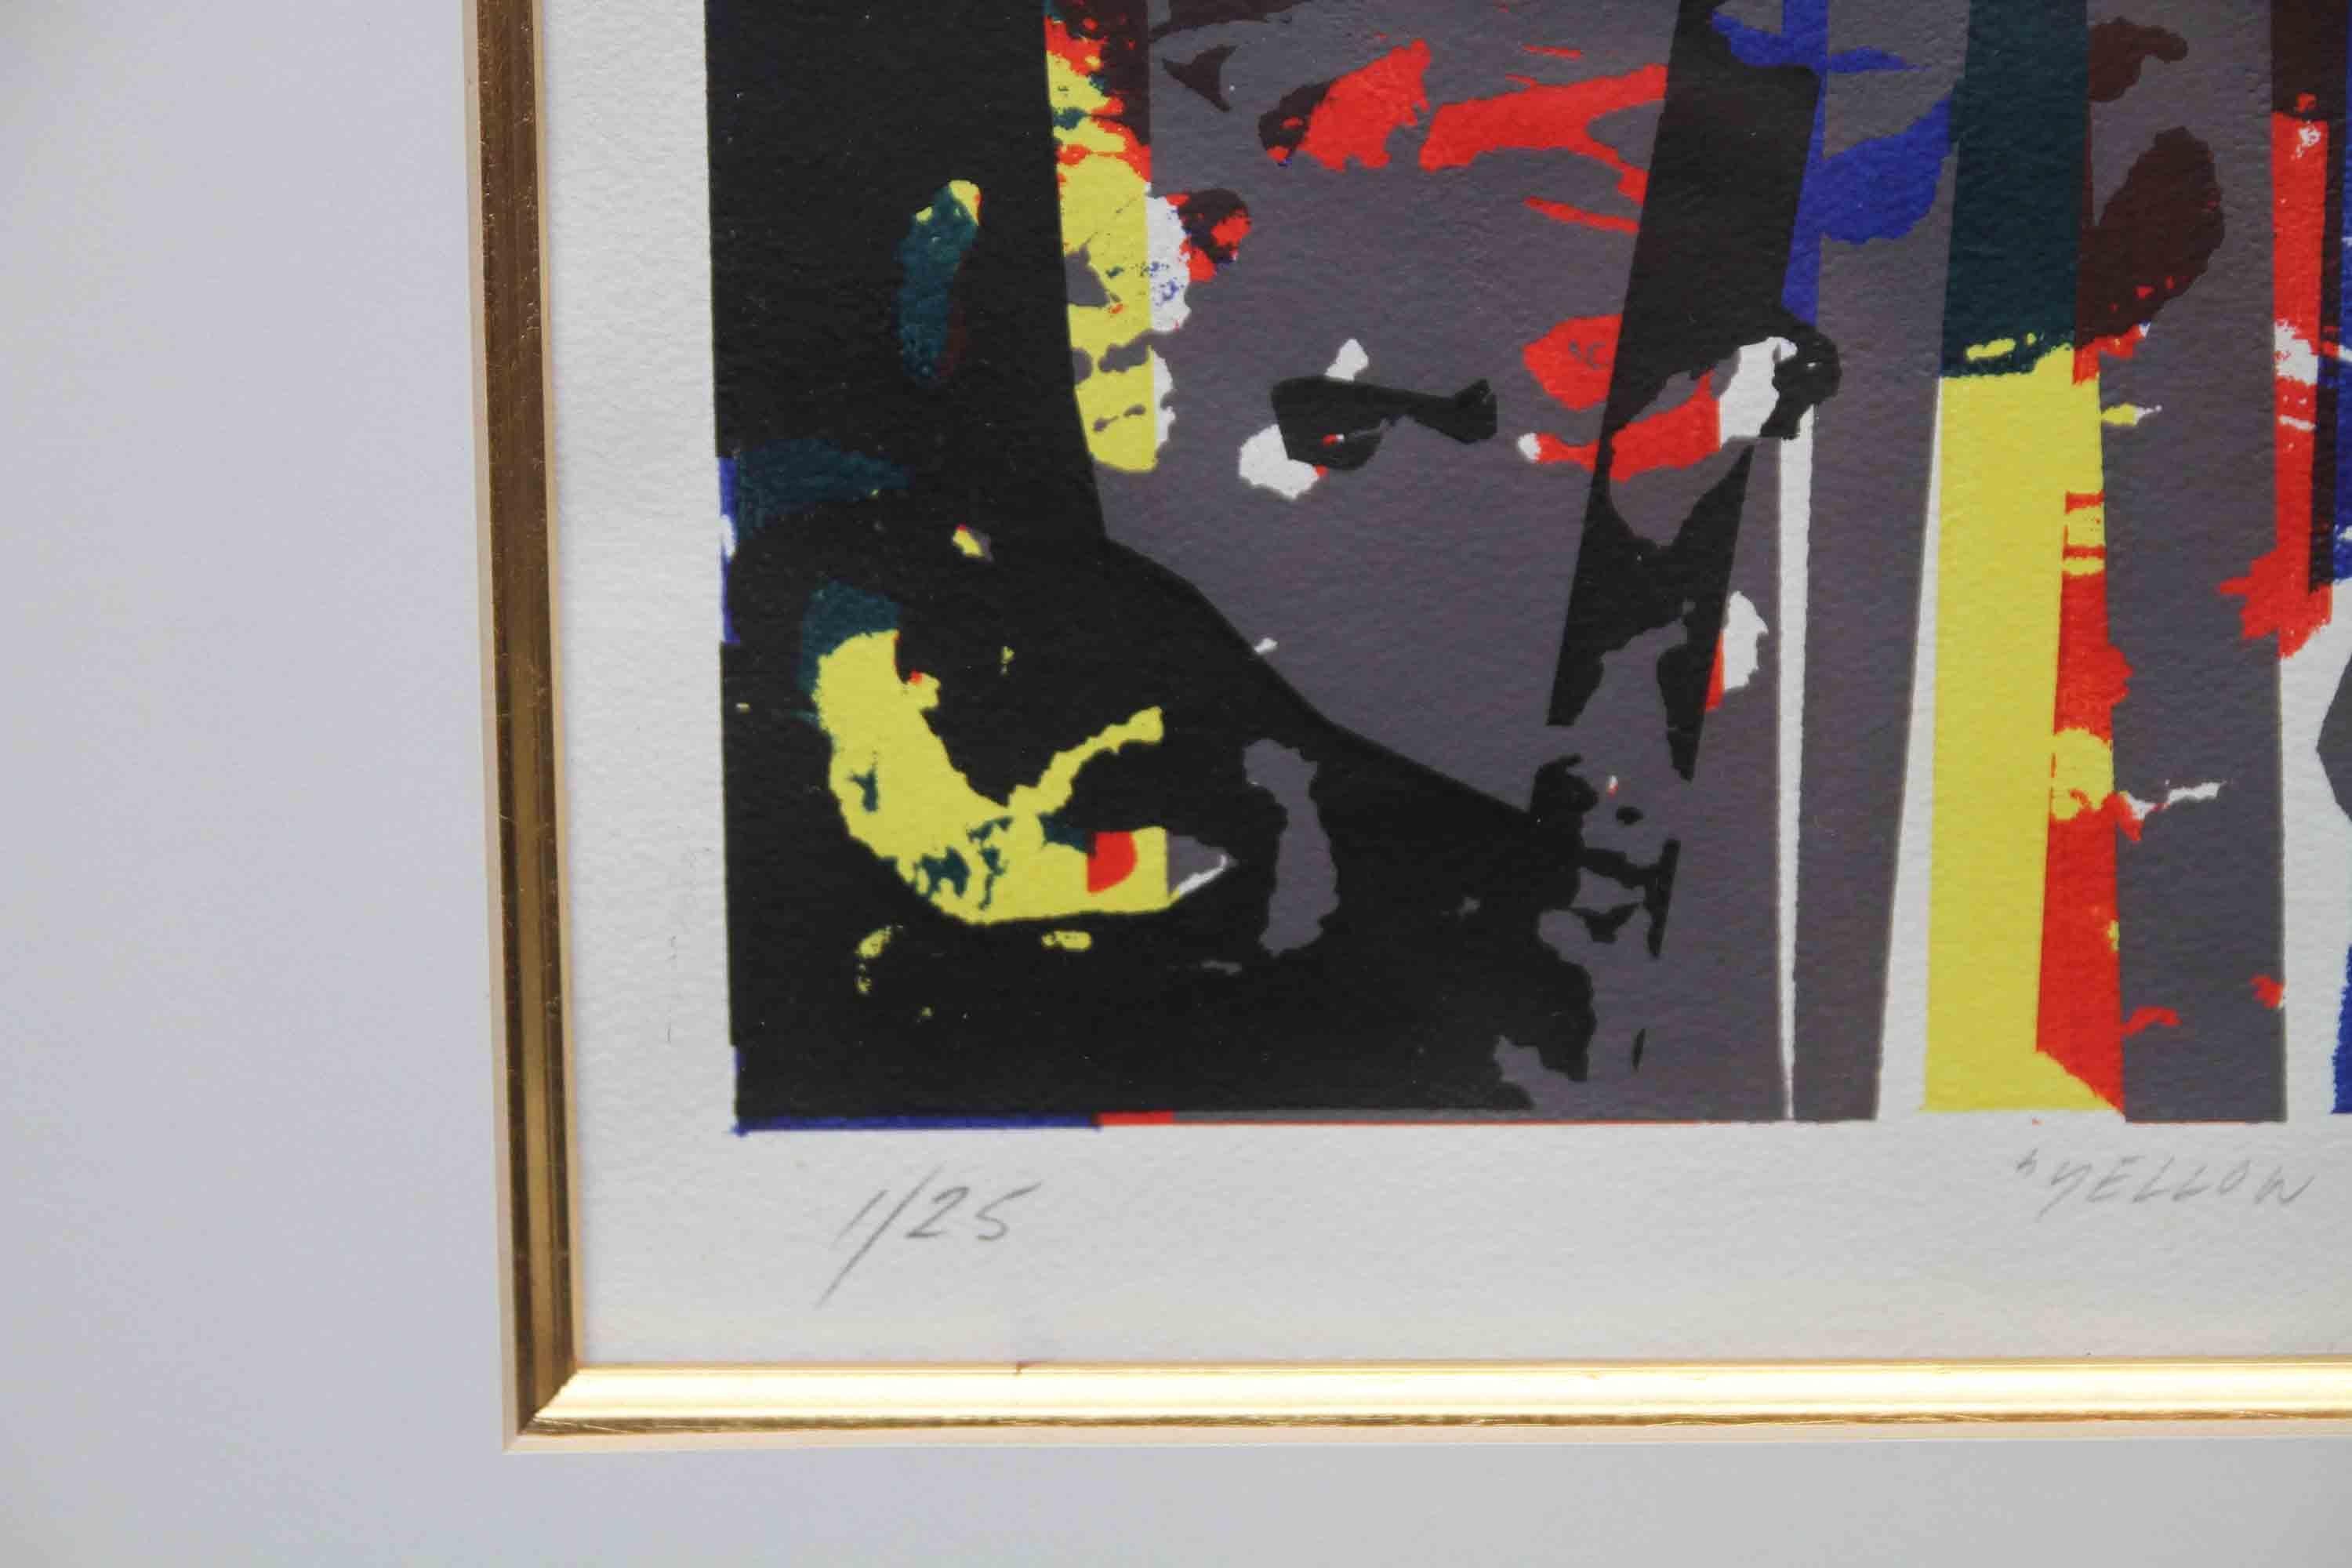 An original silkscreen print by Scottish COBRA listed artist William Gear. An internationally famous abstract artist, Gear was a member of the COBRA group which was famous in the fifties and sixties for its abstract art. This trial proof 1/25